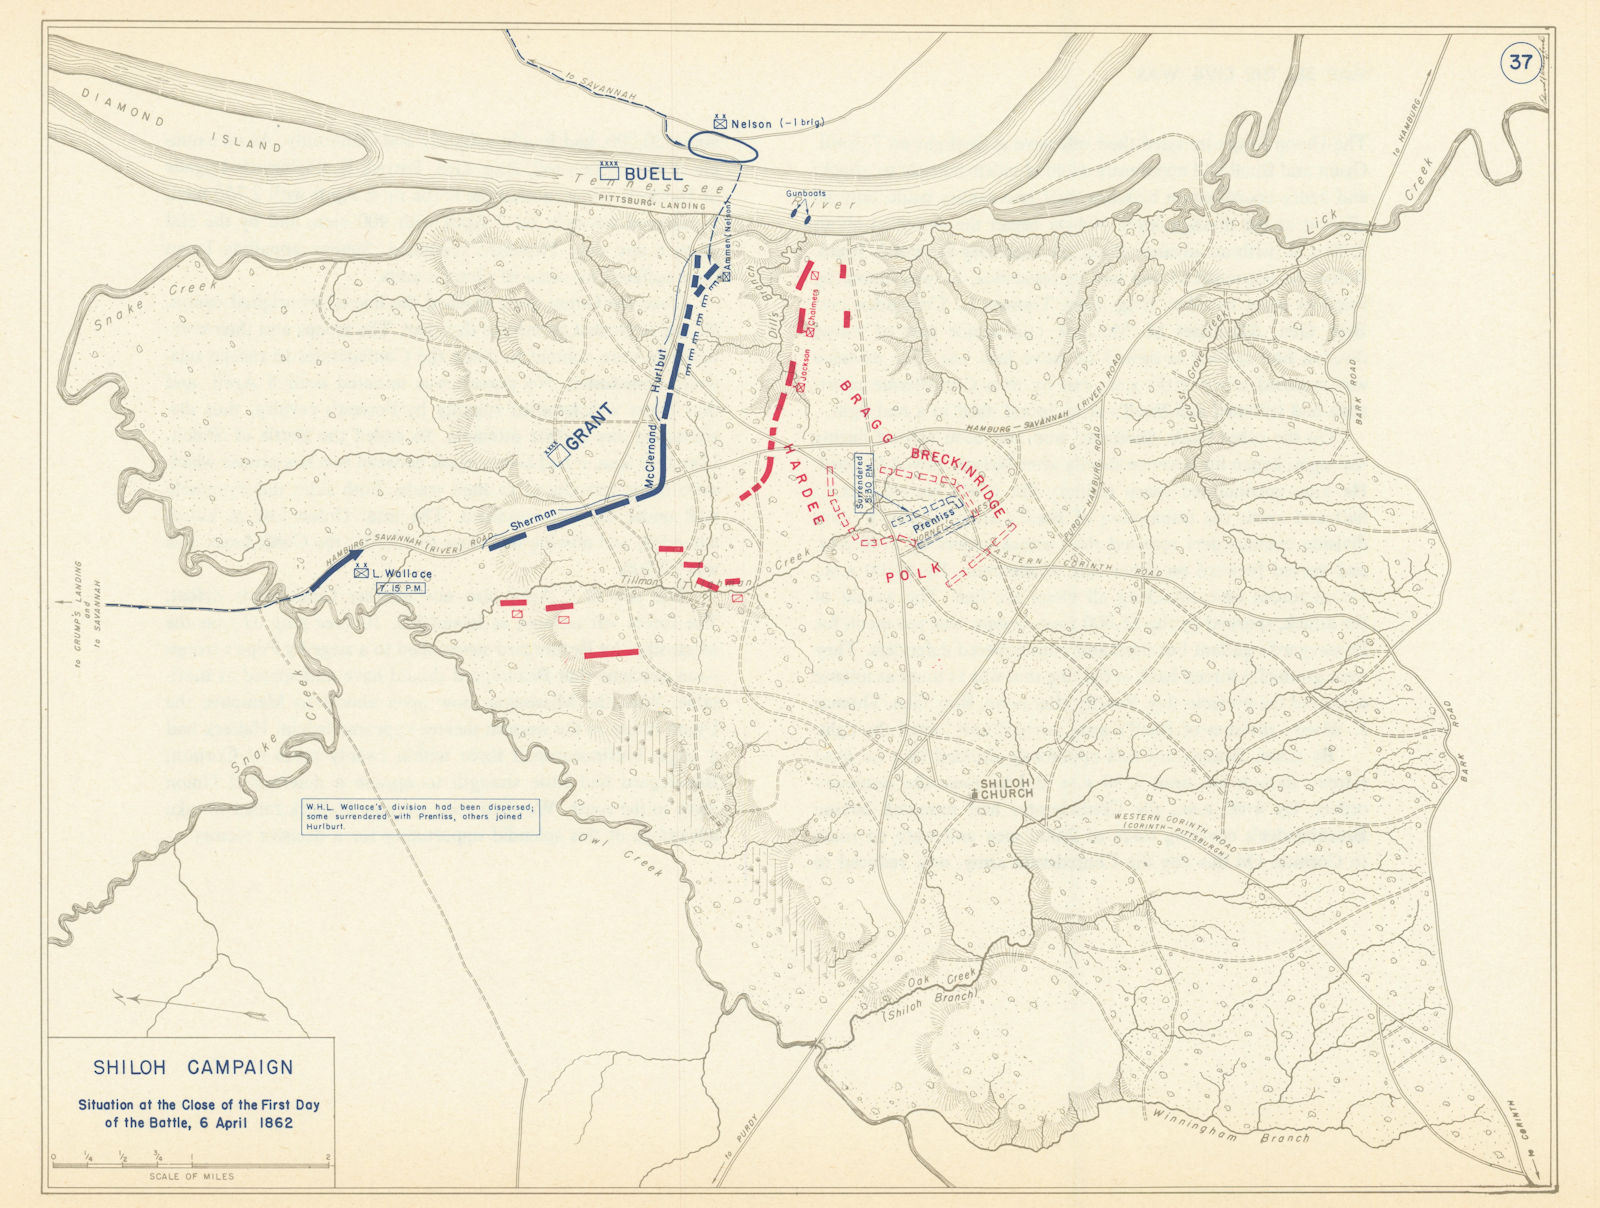 American Civil War. Evening 6 April 1862. Battle of Shiloh. Tennessee 1959 map